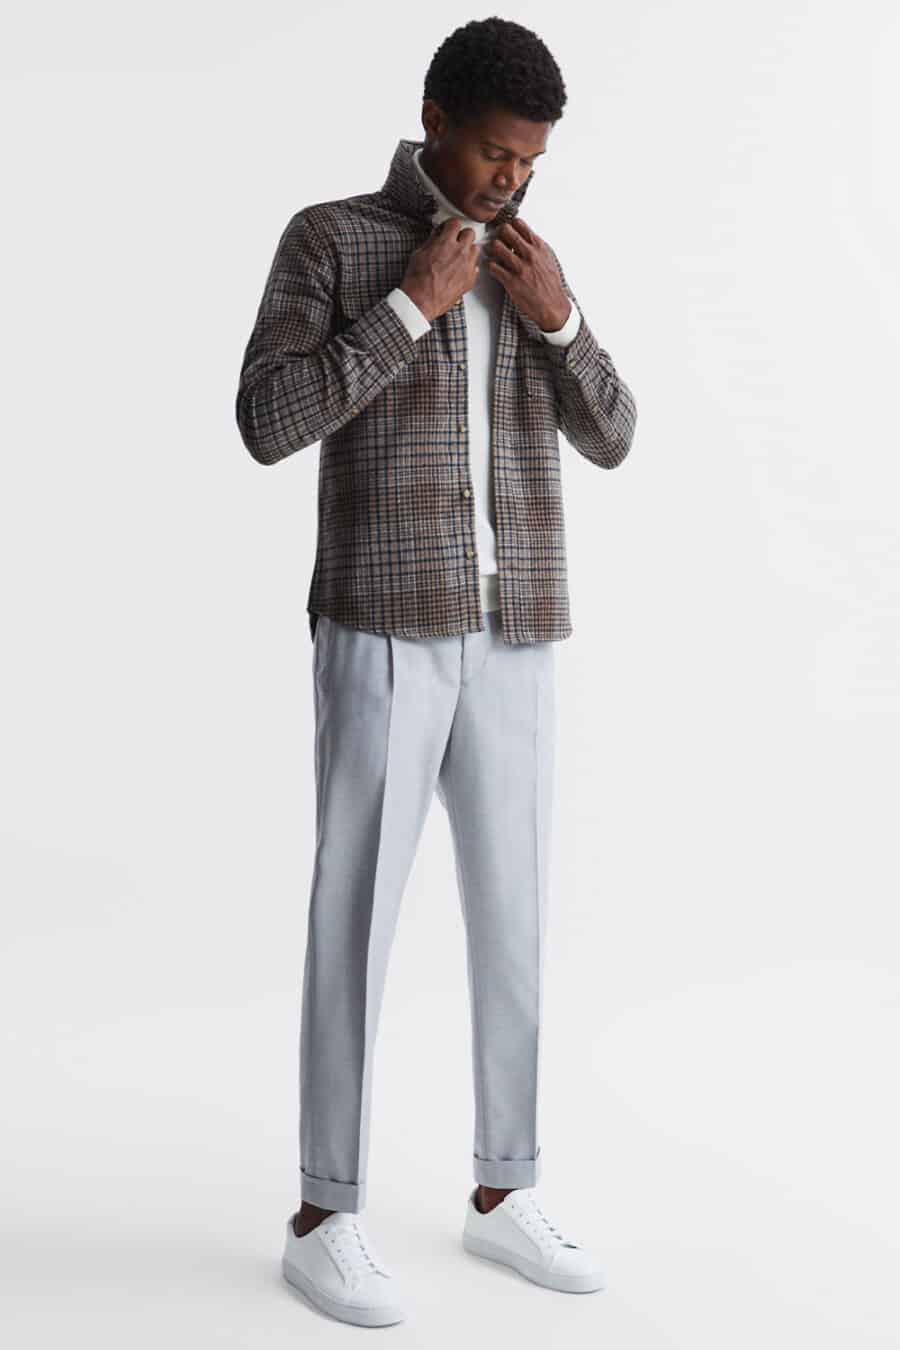 Men's light grey pleated trousers, white roll neck, brown checked flannel overshirt and white sneakers outfit